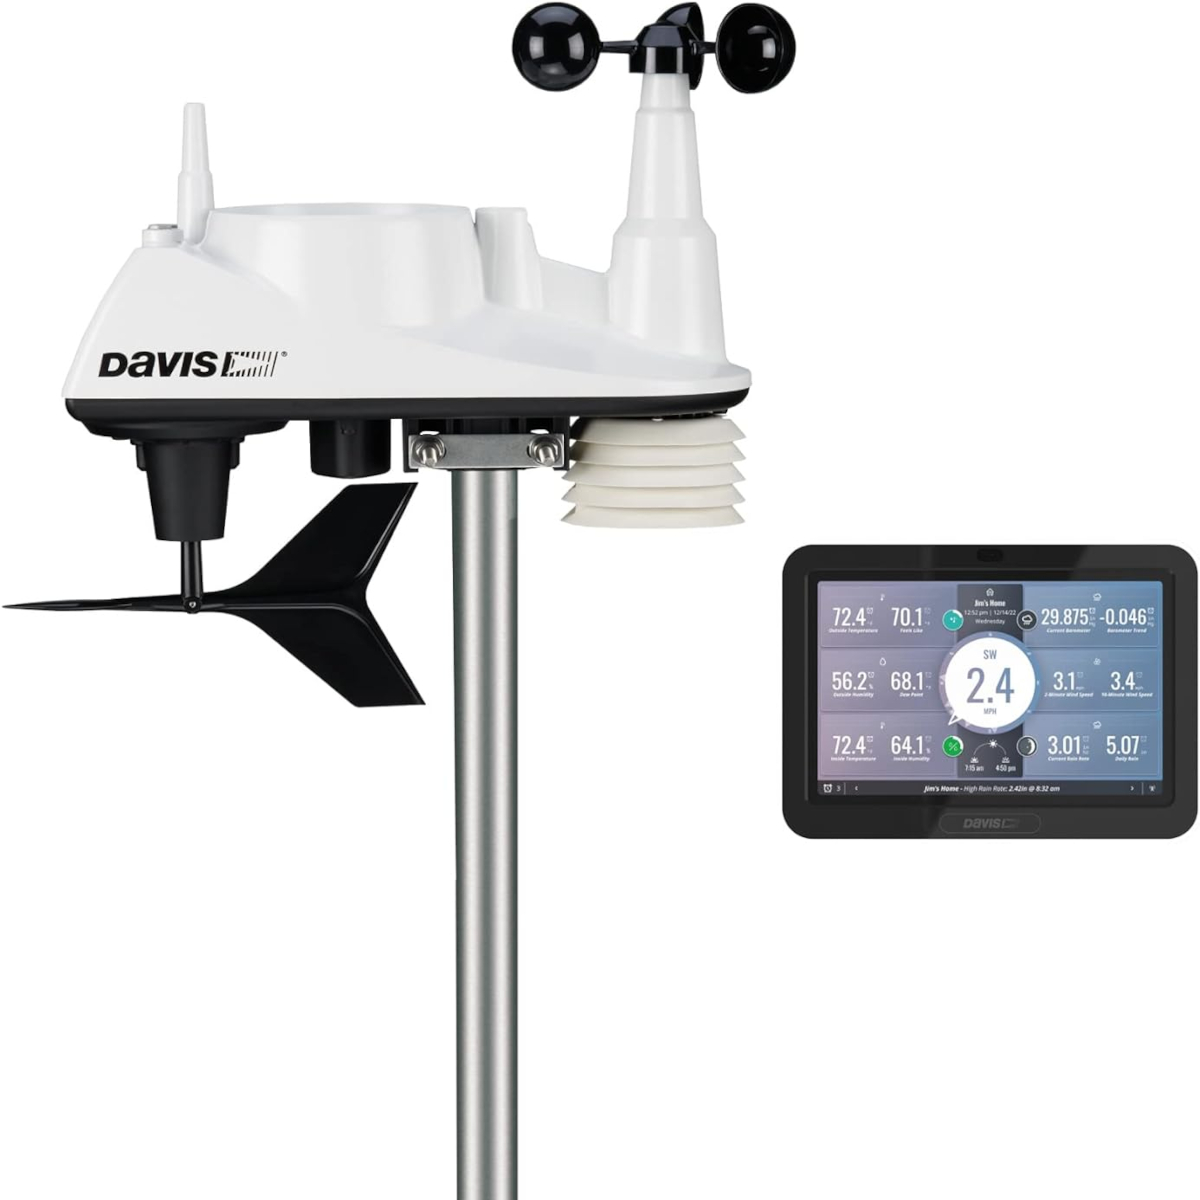 The Davis Instruments Vantage Vue Wireless Sensor home weather monitoring system on a white background.